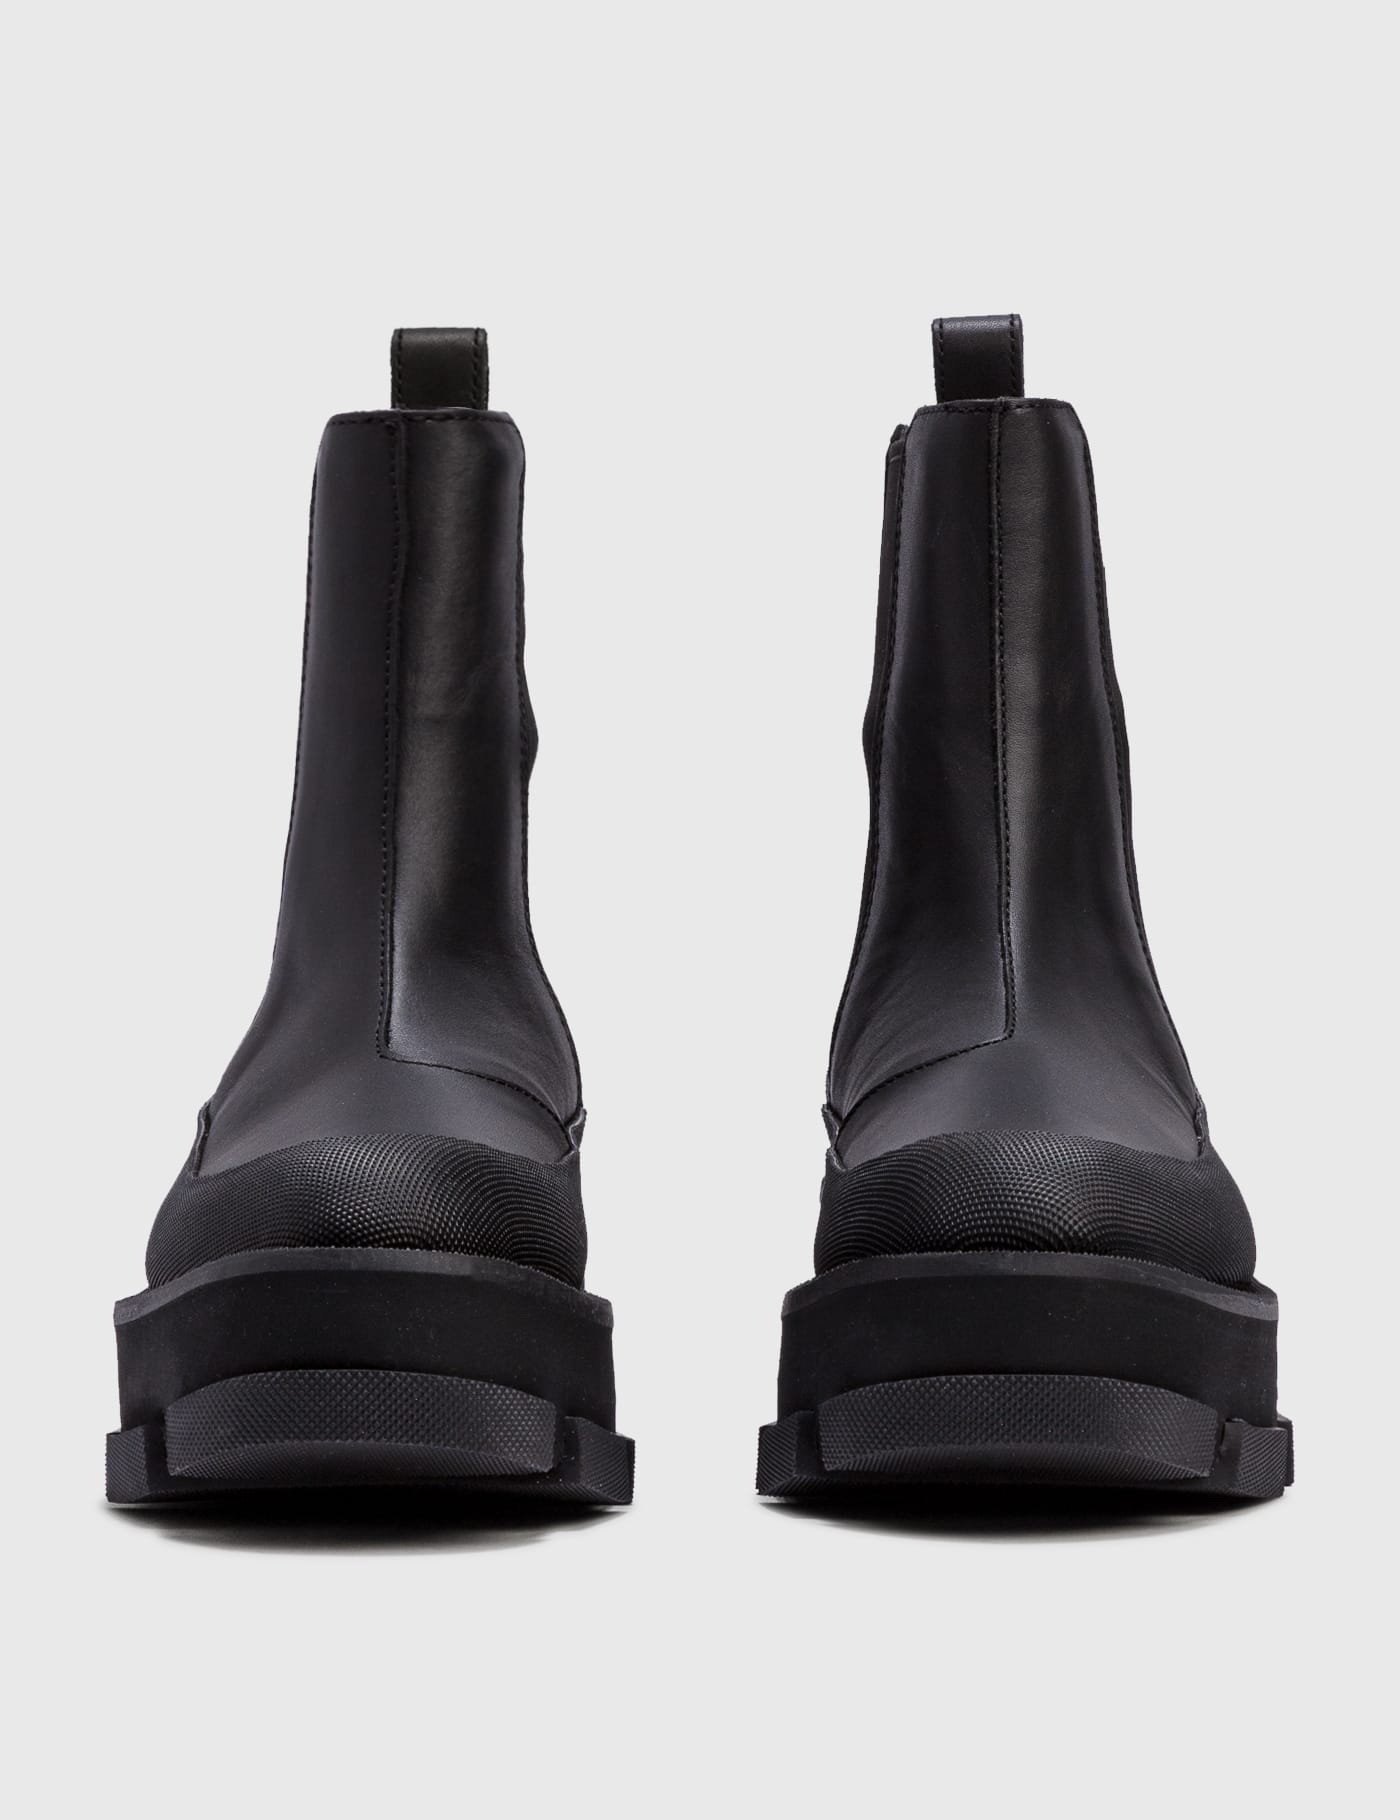 Both - Gao Platform Chelsea Boots | HBX - Globally Curated Fashion